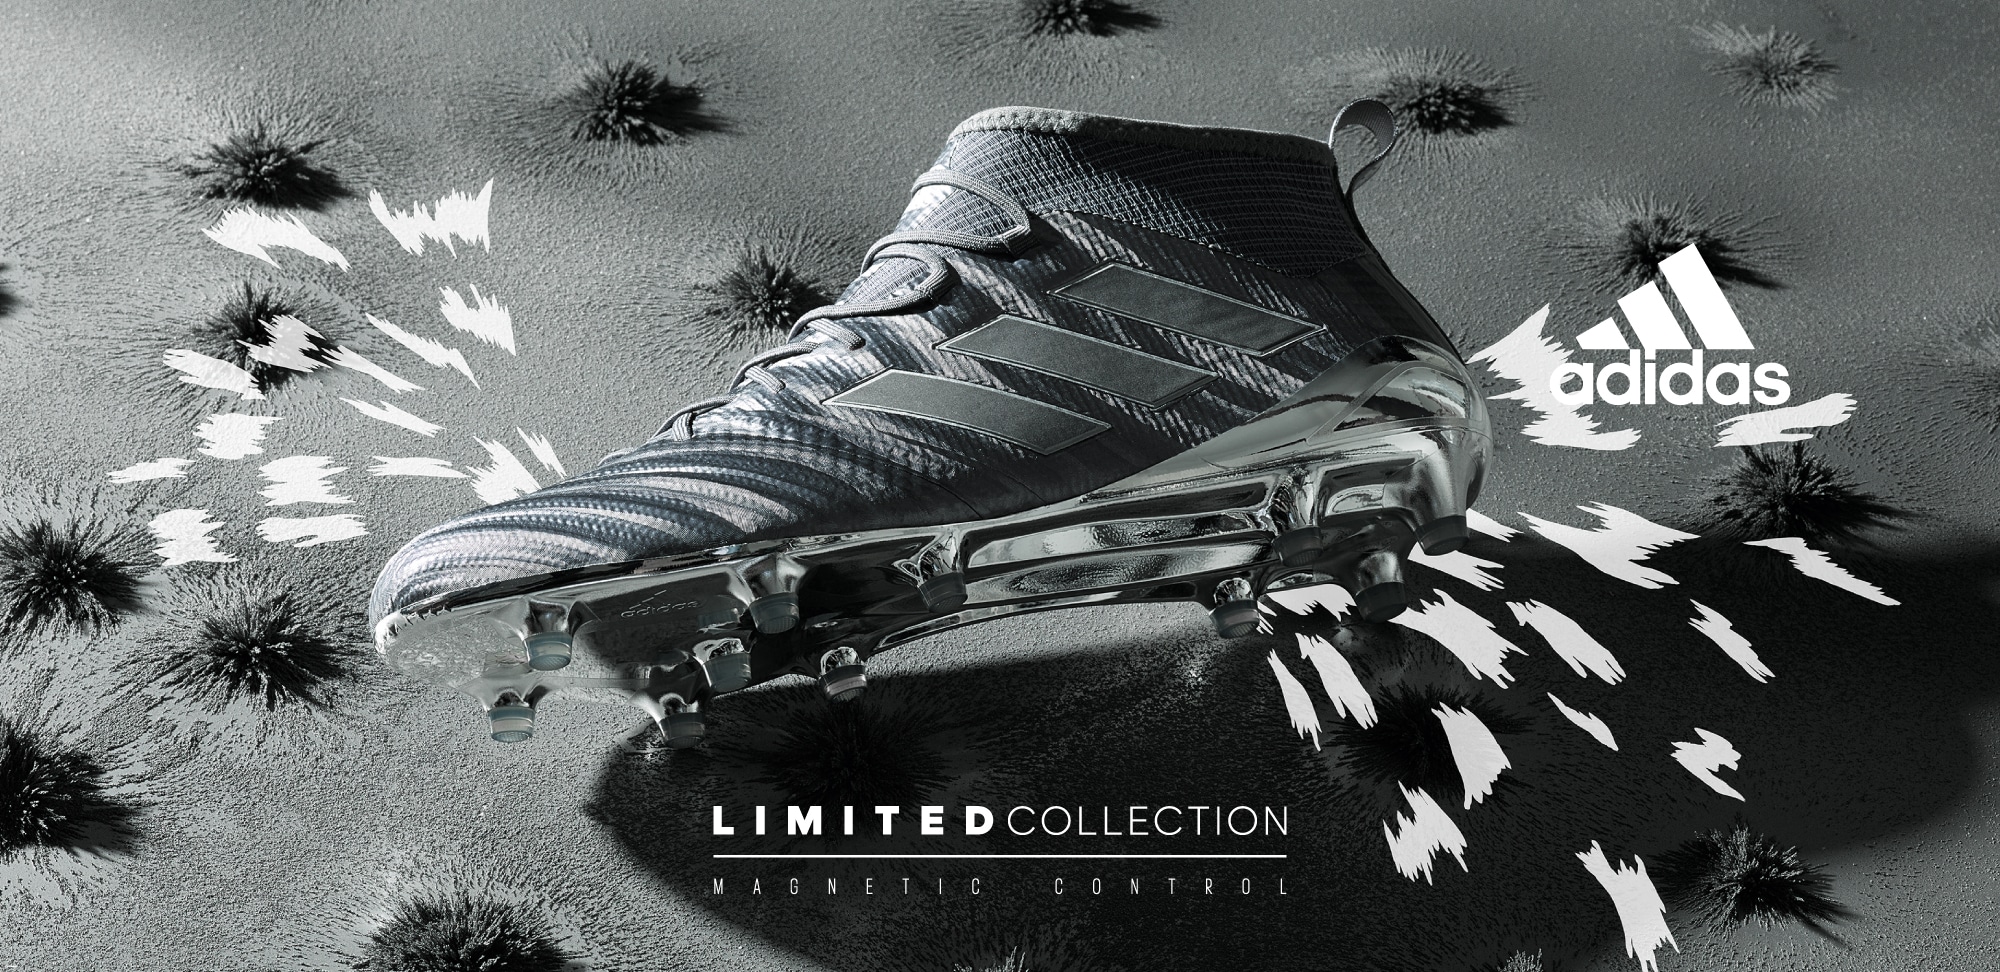 Adidas Predator プレデター Cold Blooded Pack Soccer Shop Kamo